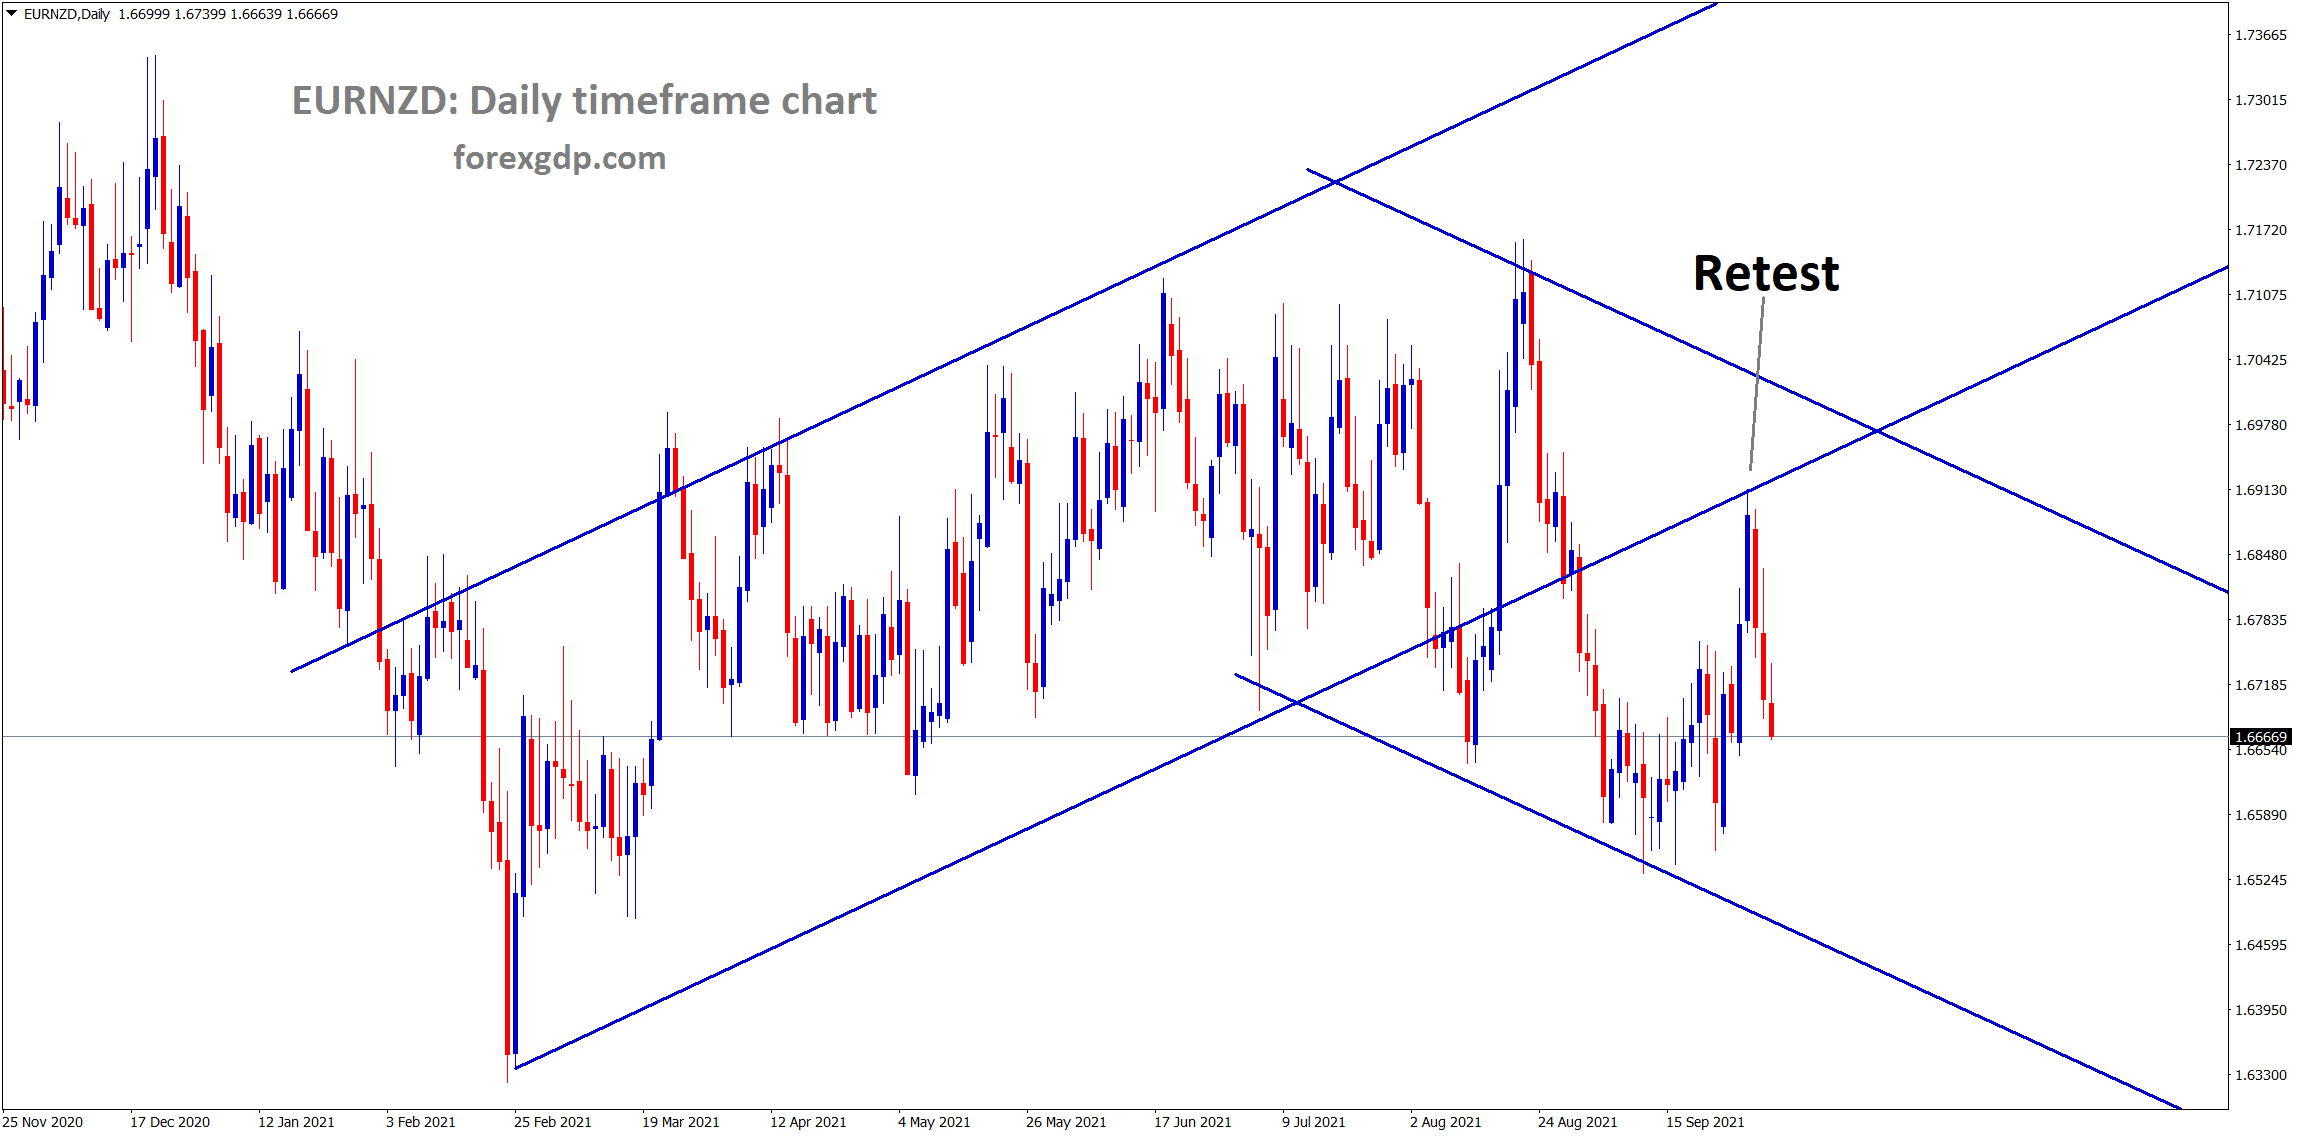 EURNZD is falling after retesting the broken ascending channel line